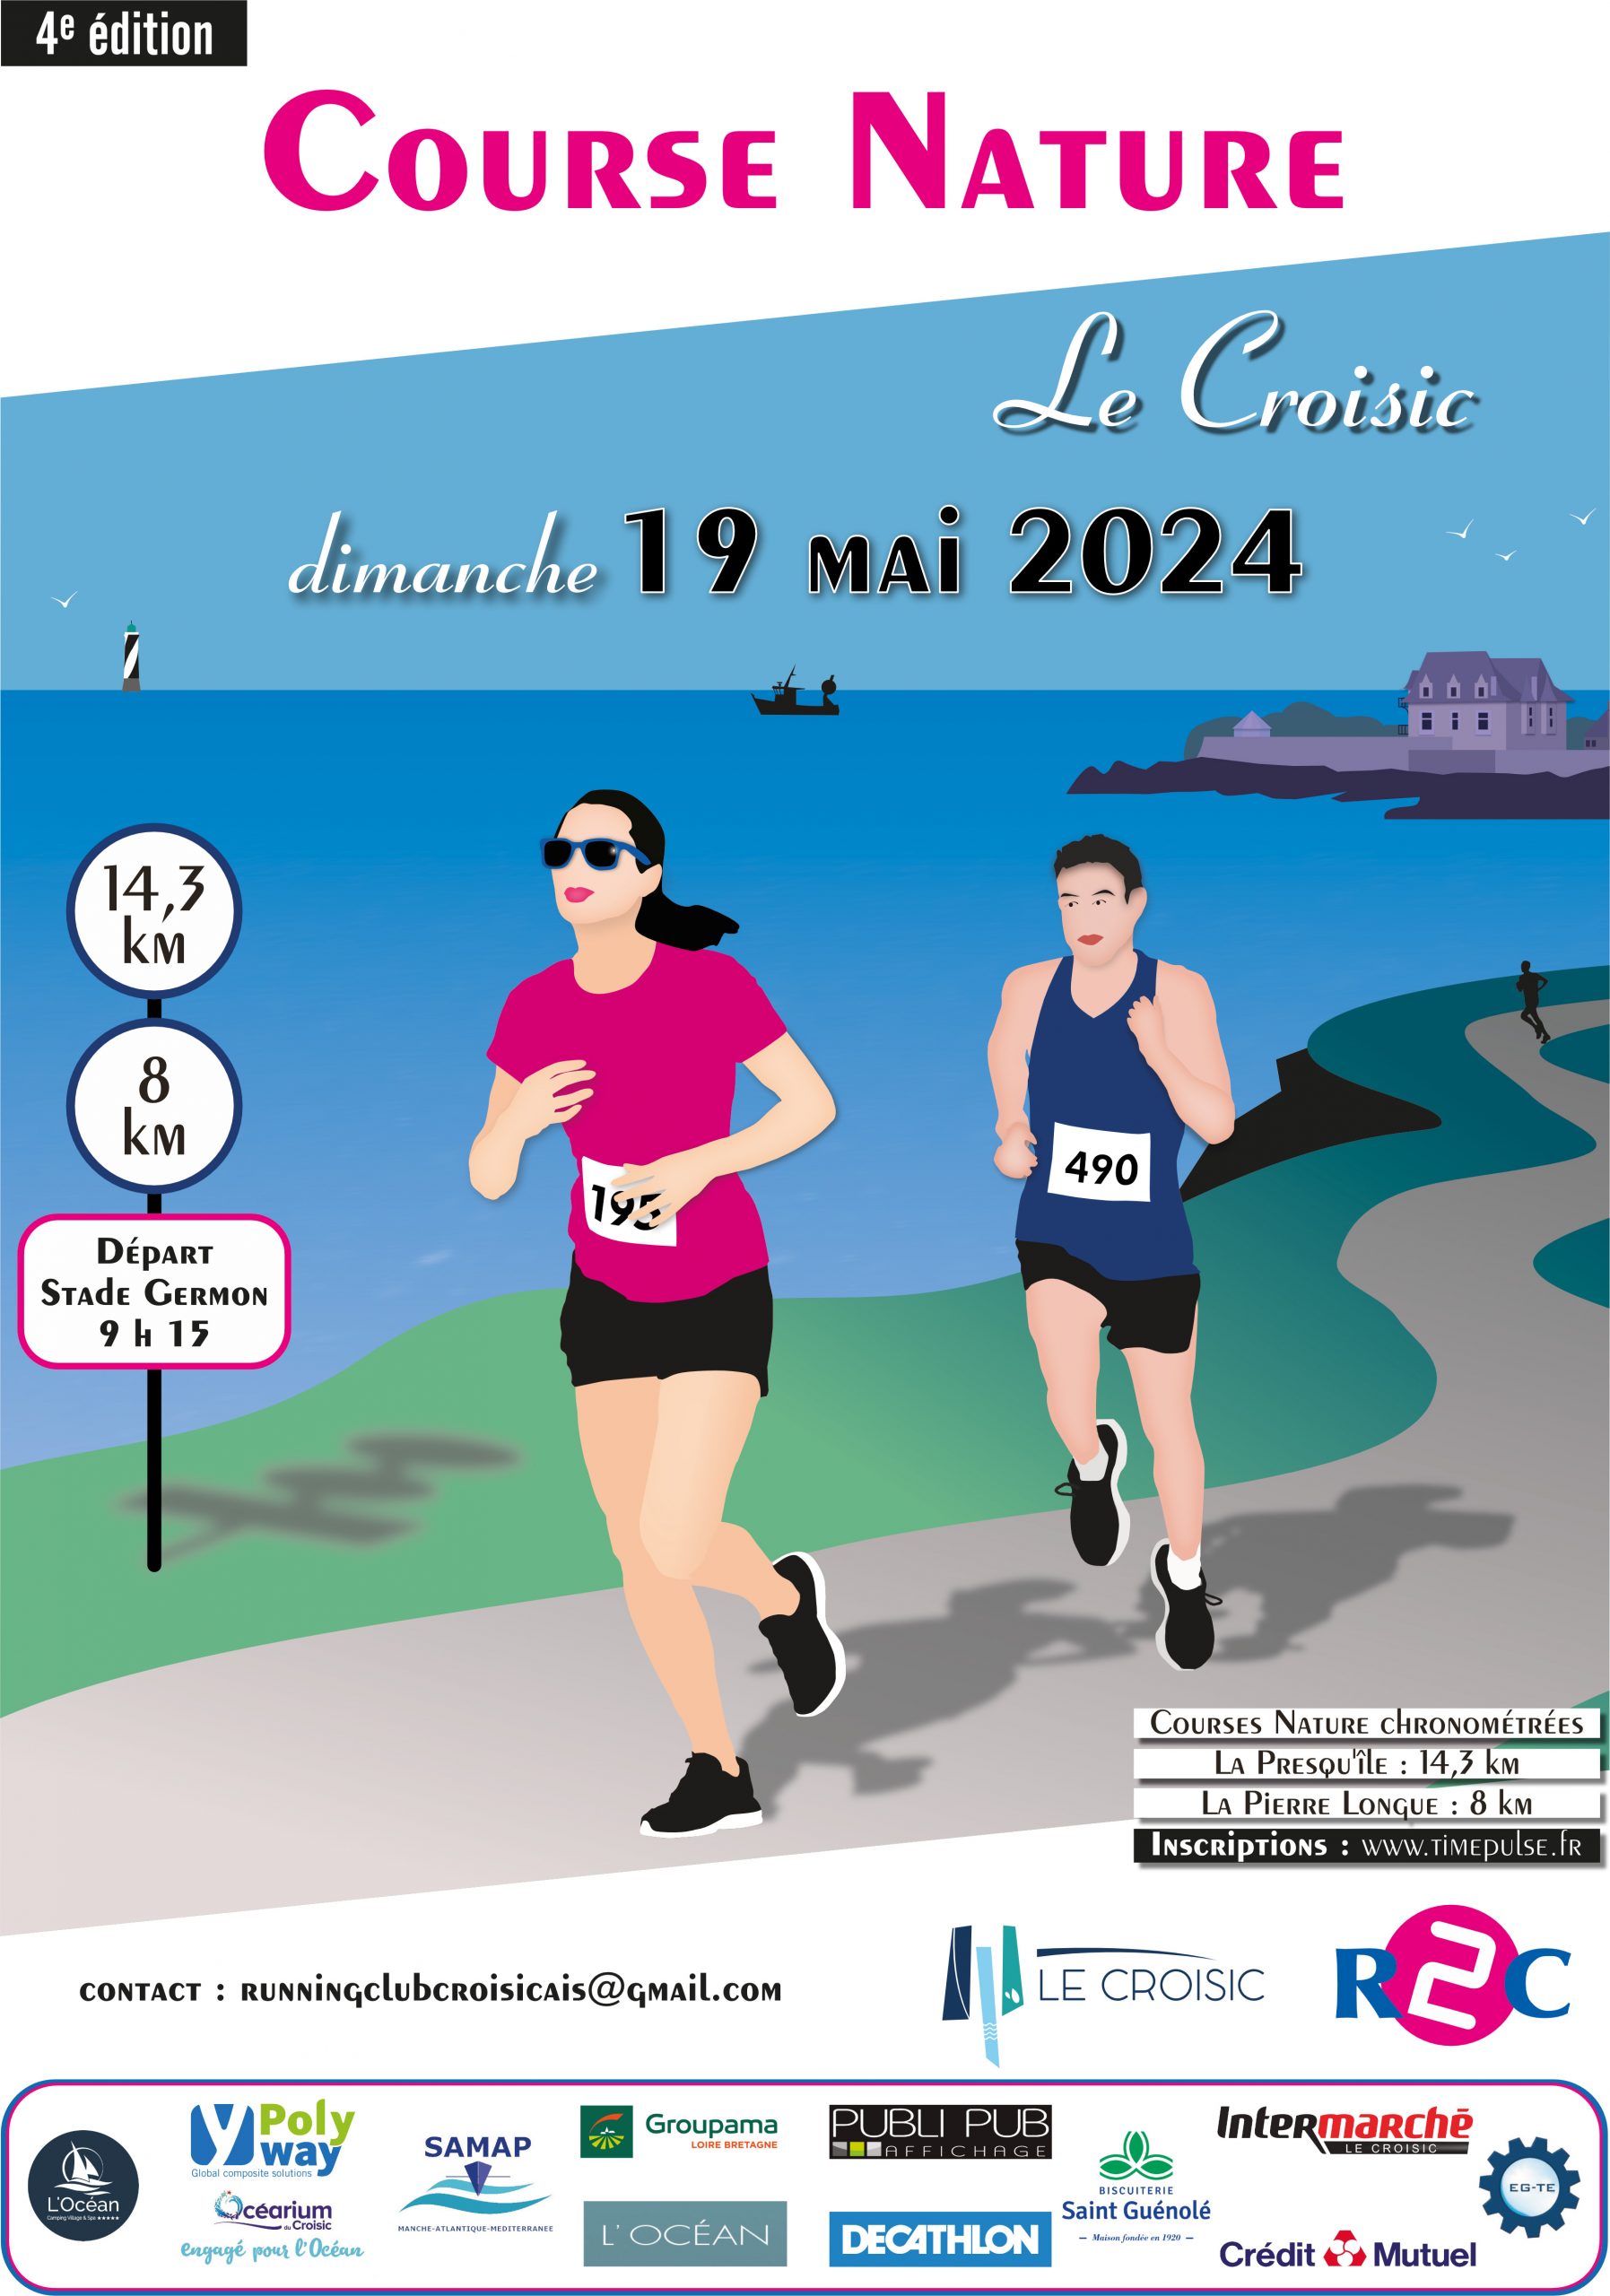 Nature race on the Croisic peninsula – 9:15 a.m. to 11:30 a.m.